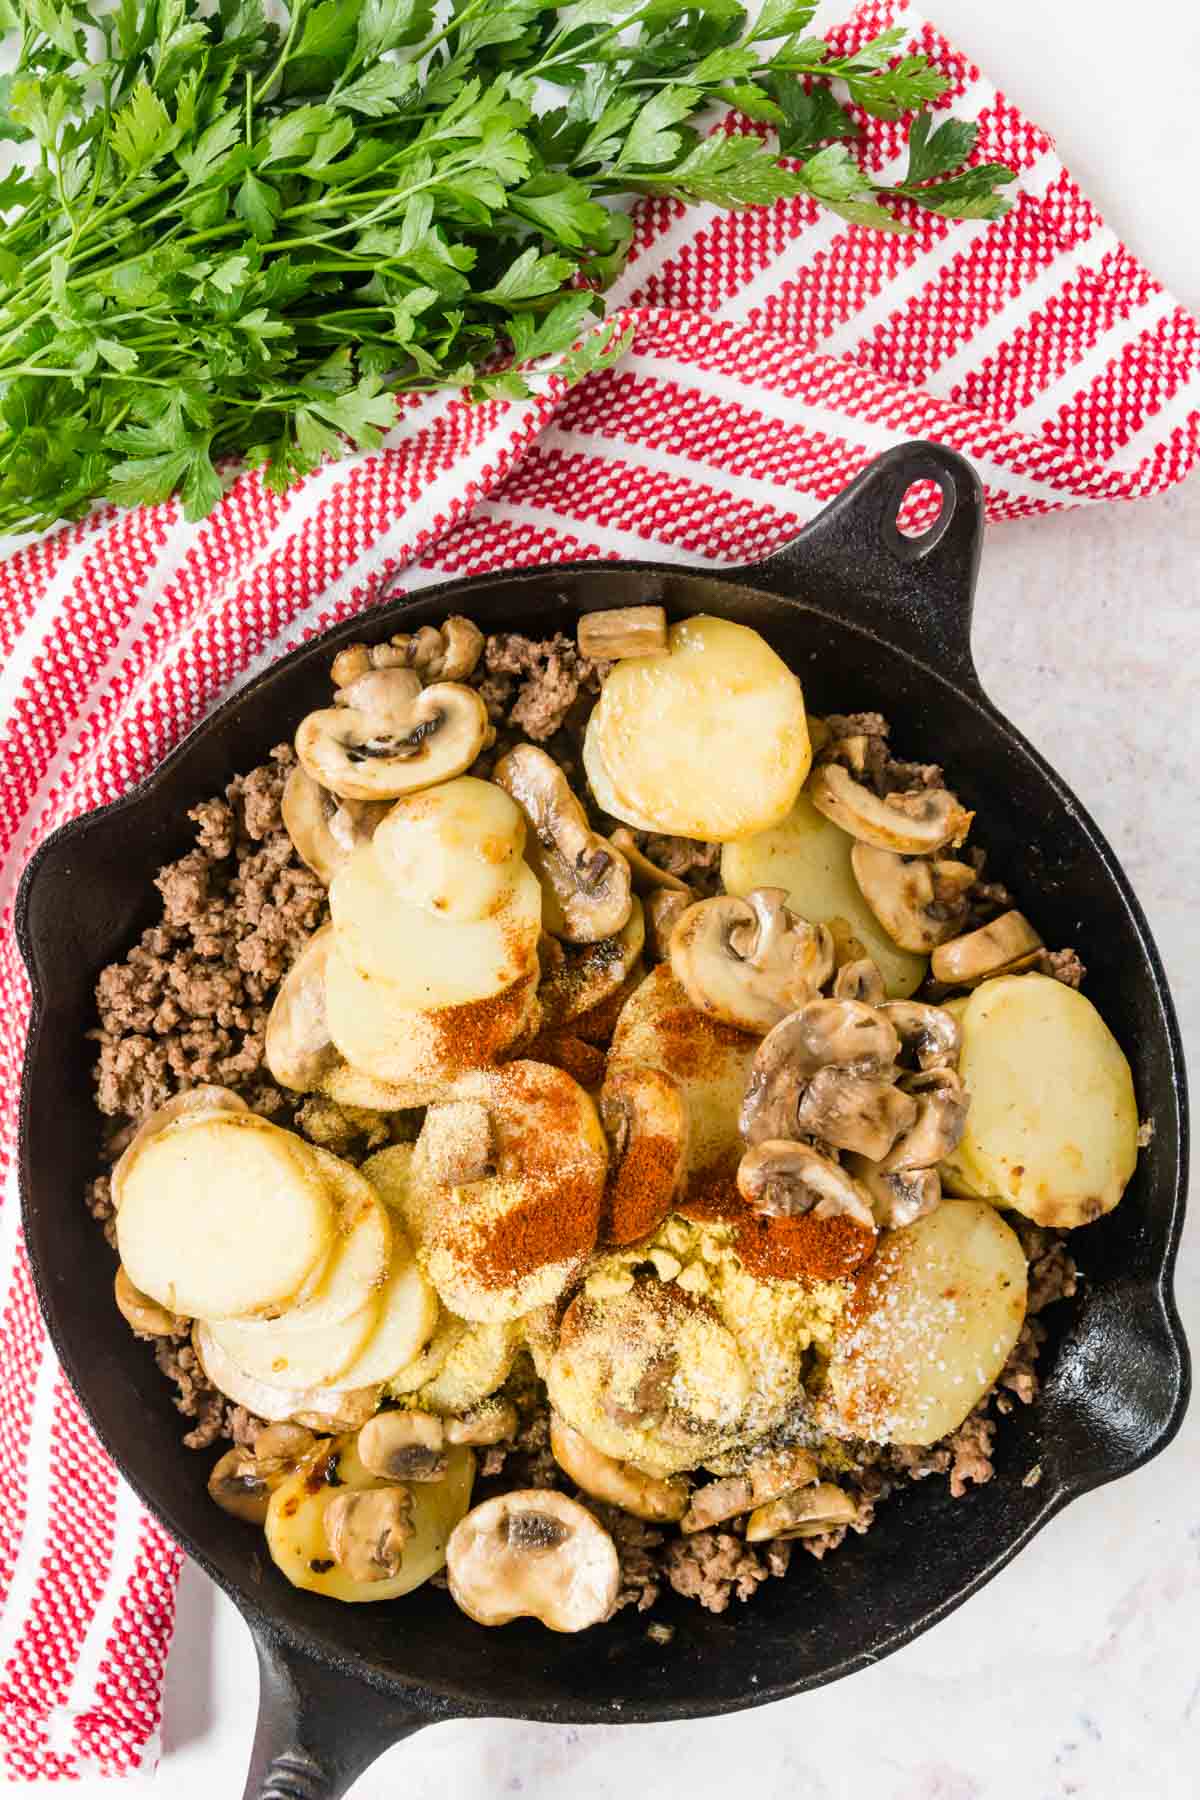 Spices sprinkled on top of meat, potatoes, and mushrooms in the skillet.